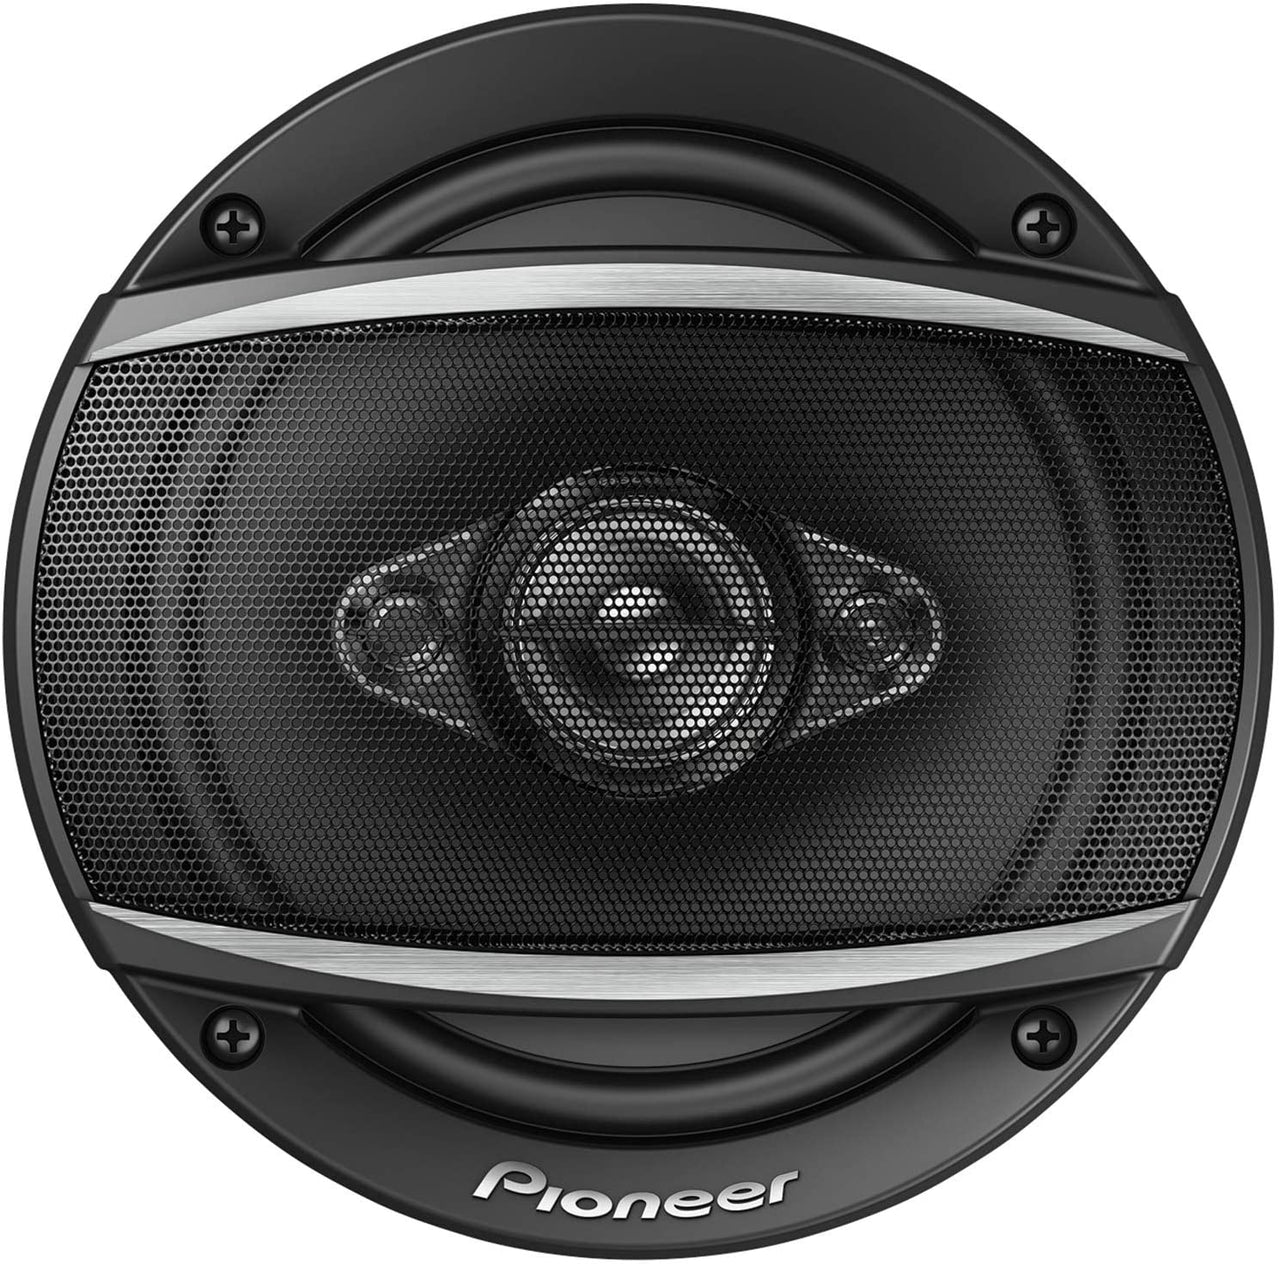 Pioneer TS-A1680F 6.5" 350W Max 4-Way Coaxial Speakers